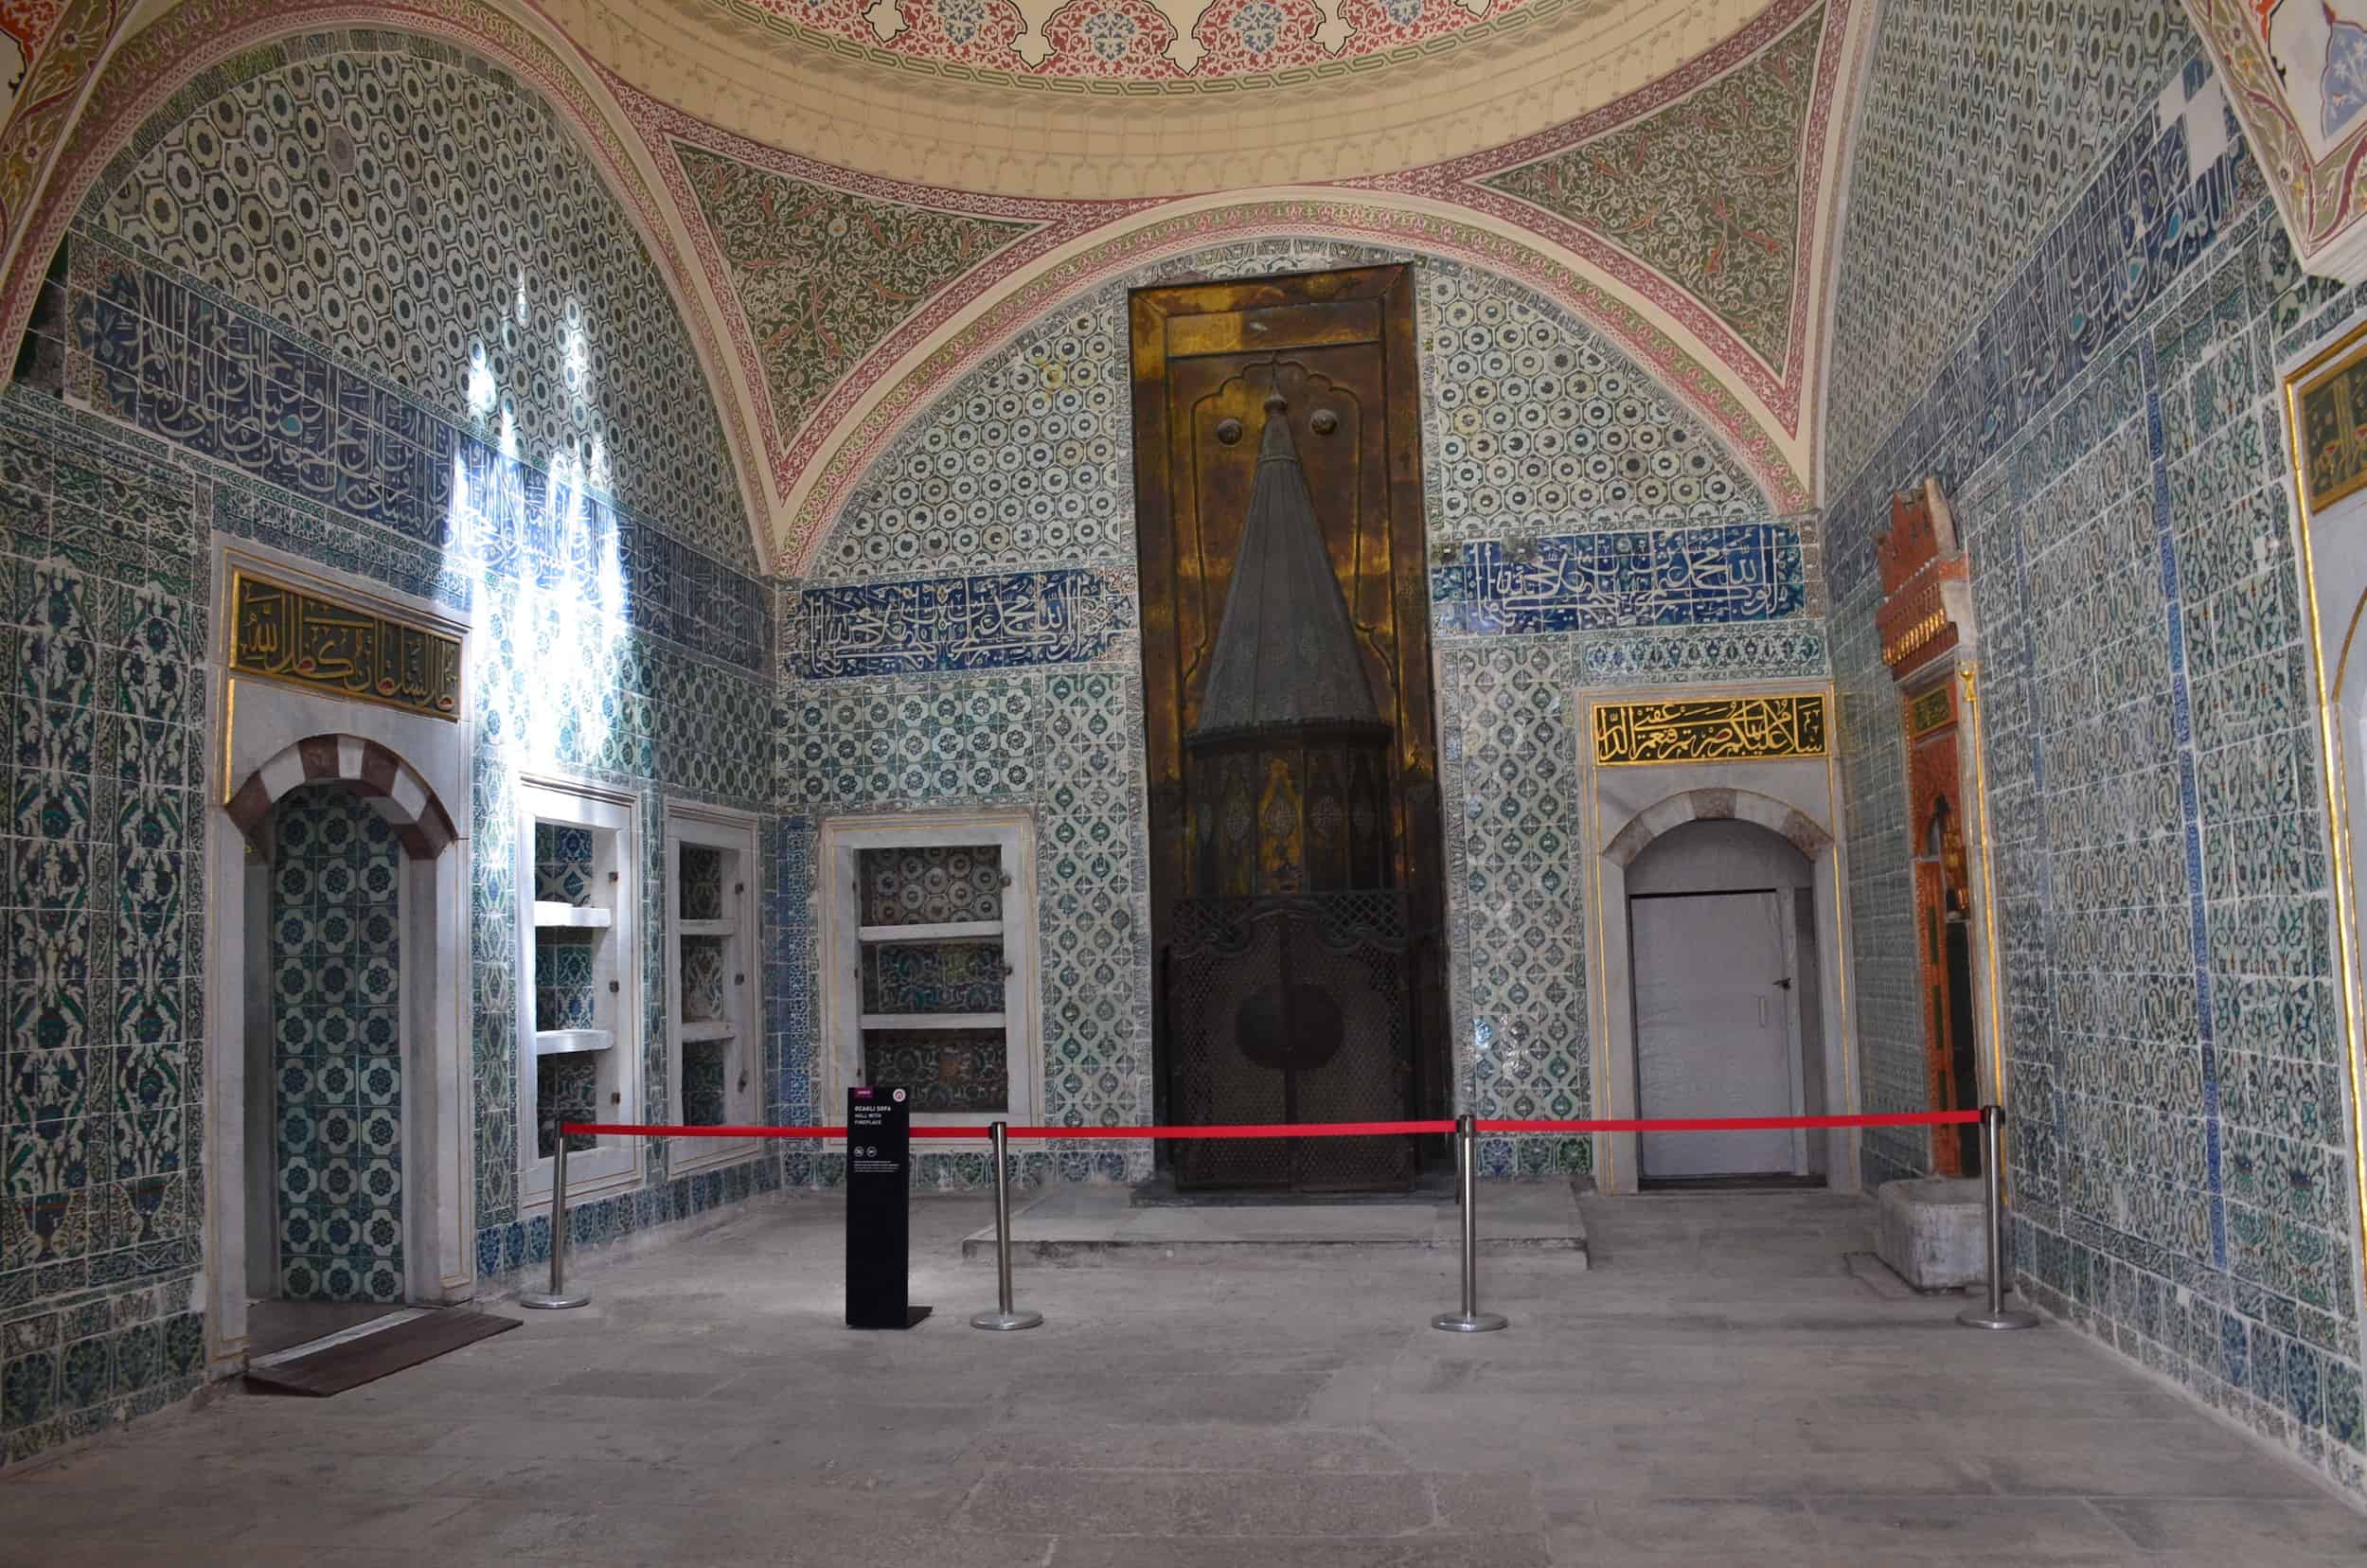 Hall with the Fireplace in the Imperial Harem at Topkapi Palace in Istanbul, Turkey